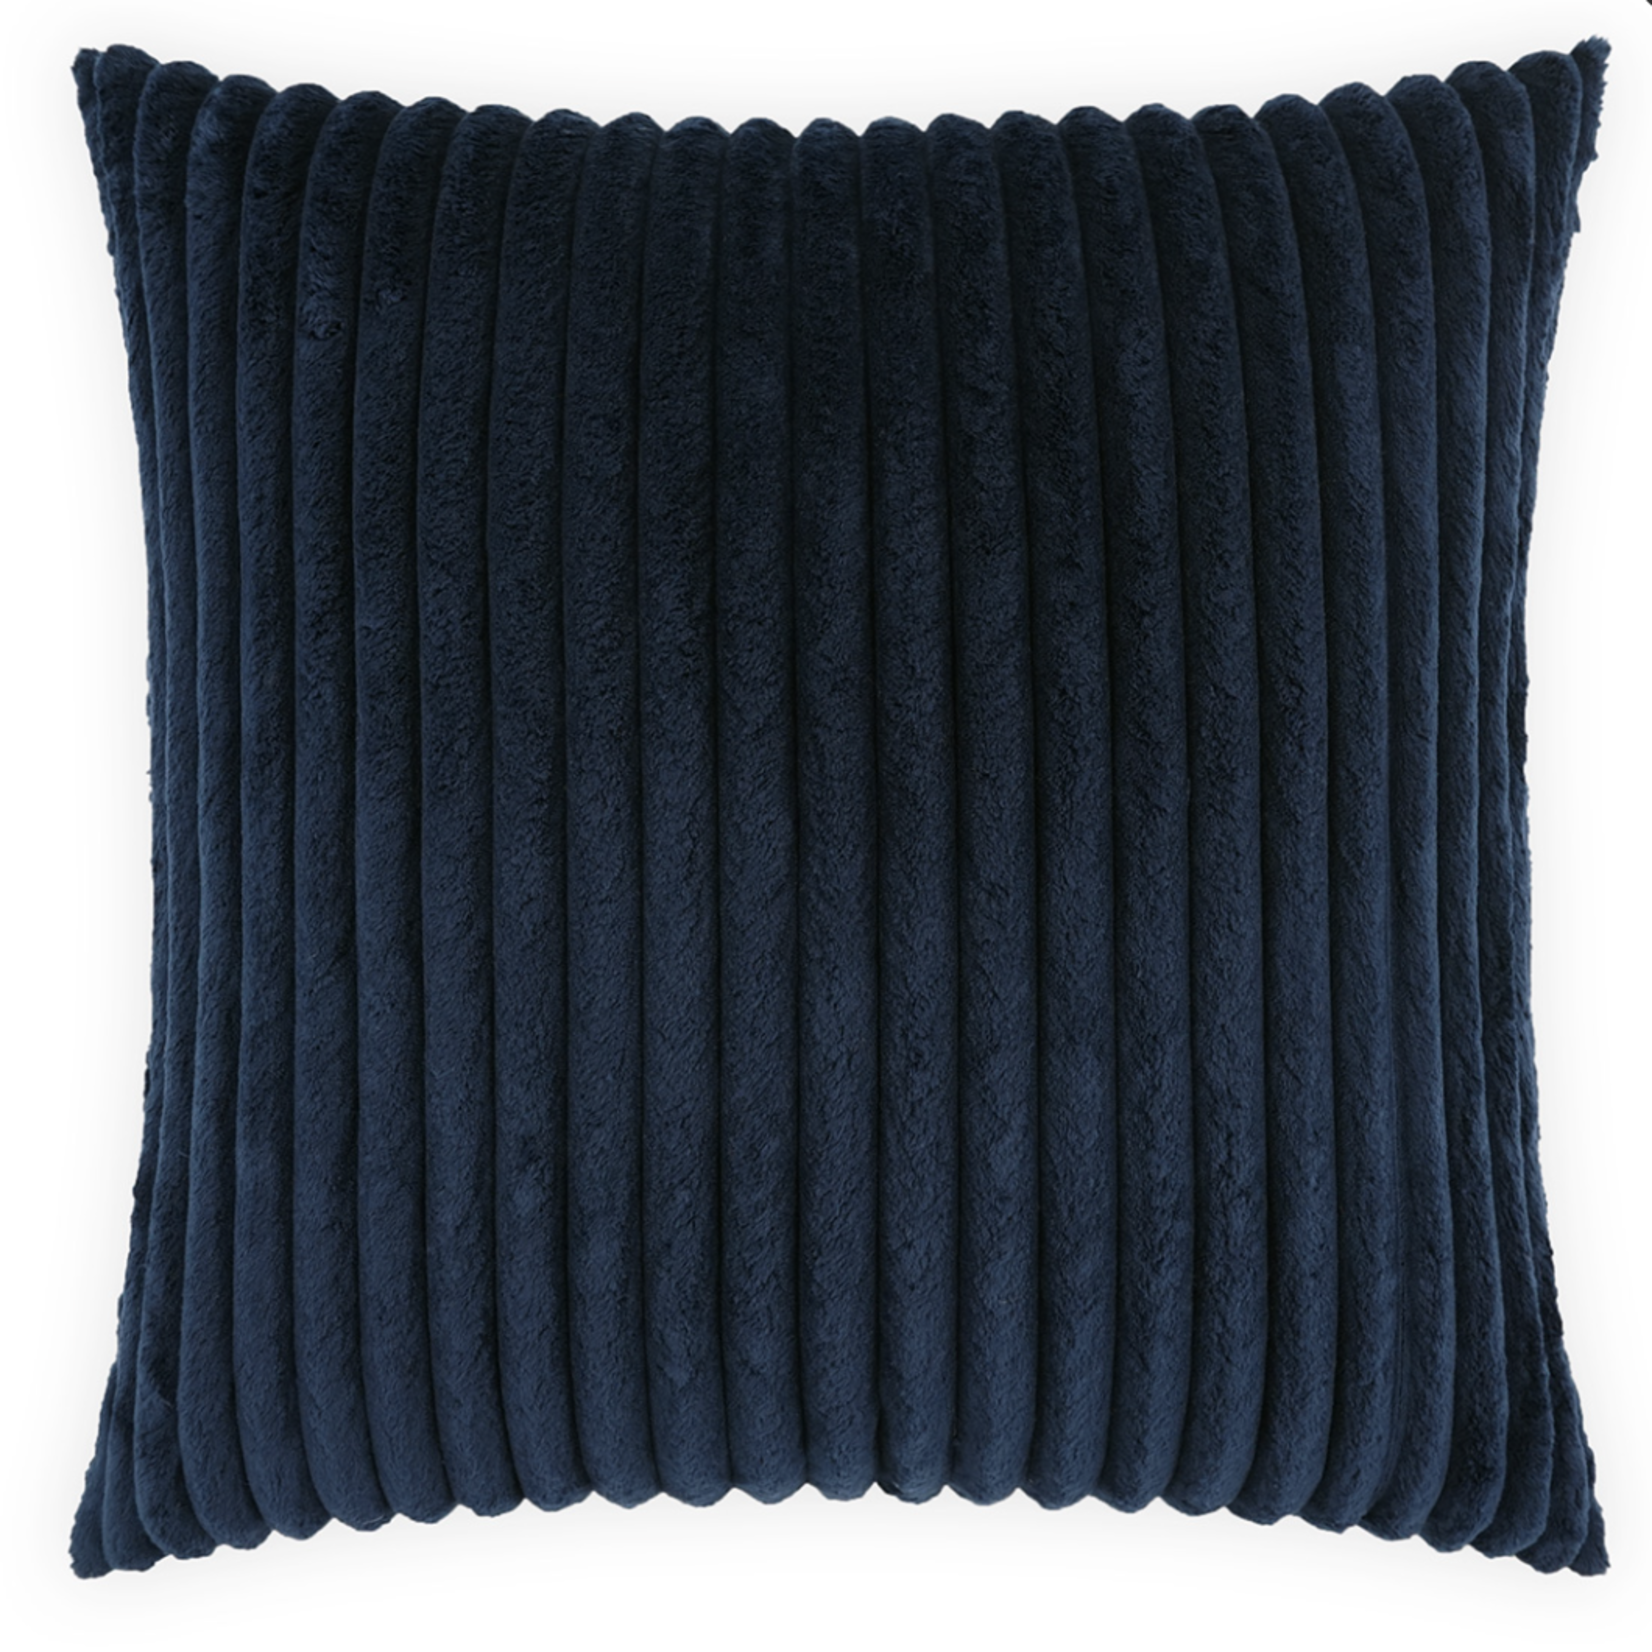 Outside The Box 24x24 Megga Square Feather Down Pillow In Navy